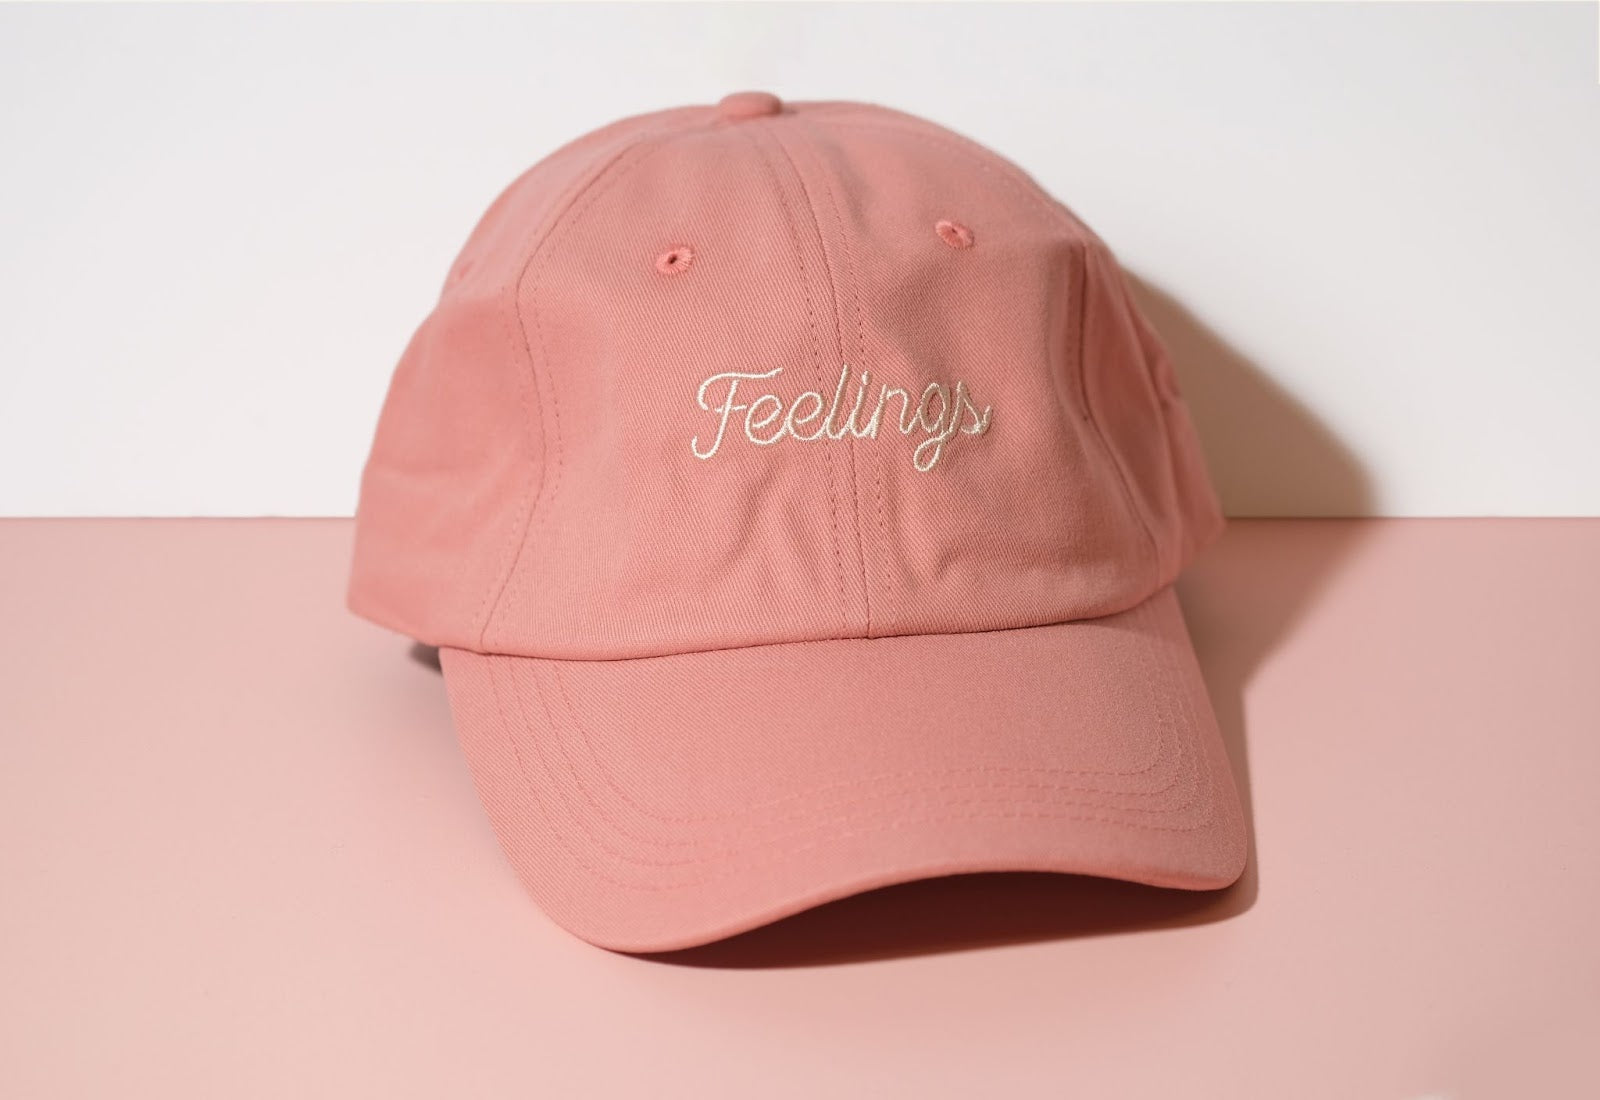 The ‘Feelings’ hat! Because who needs subtlety when you can wear your emotions right on your head? It's not just a hat; it's a sartorial mic drop, announcing to the world, "Yeah, I've got feelings, and I'm not afraid to show it!"